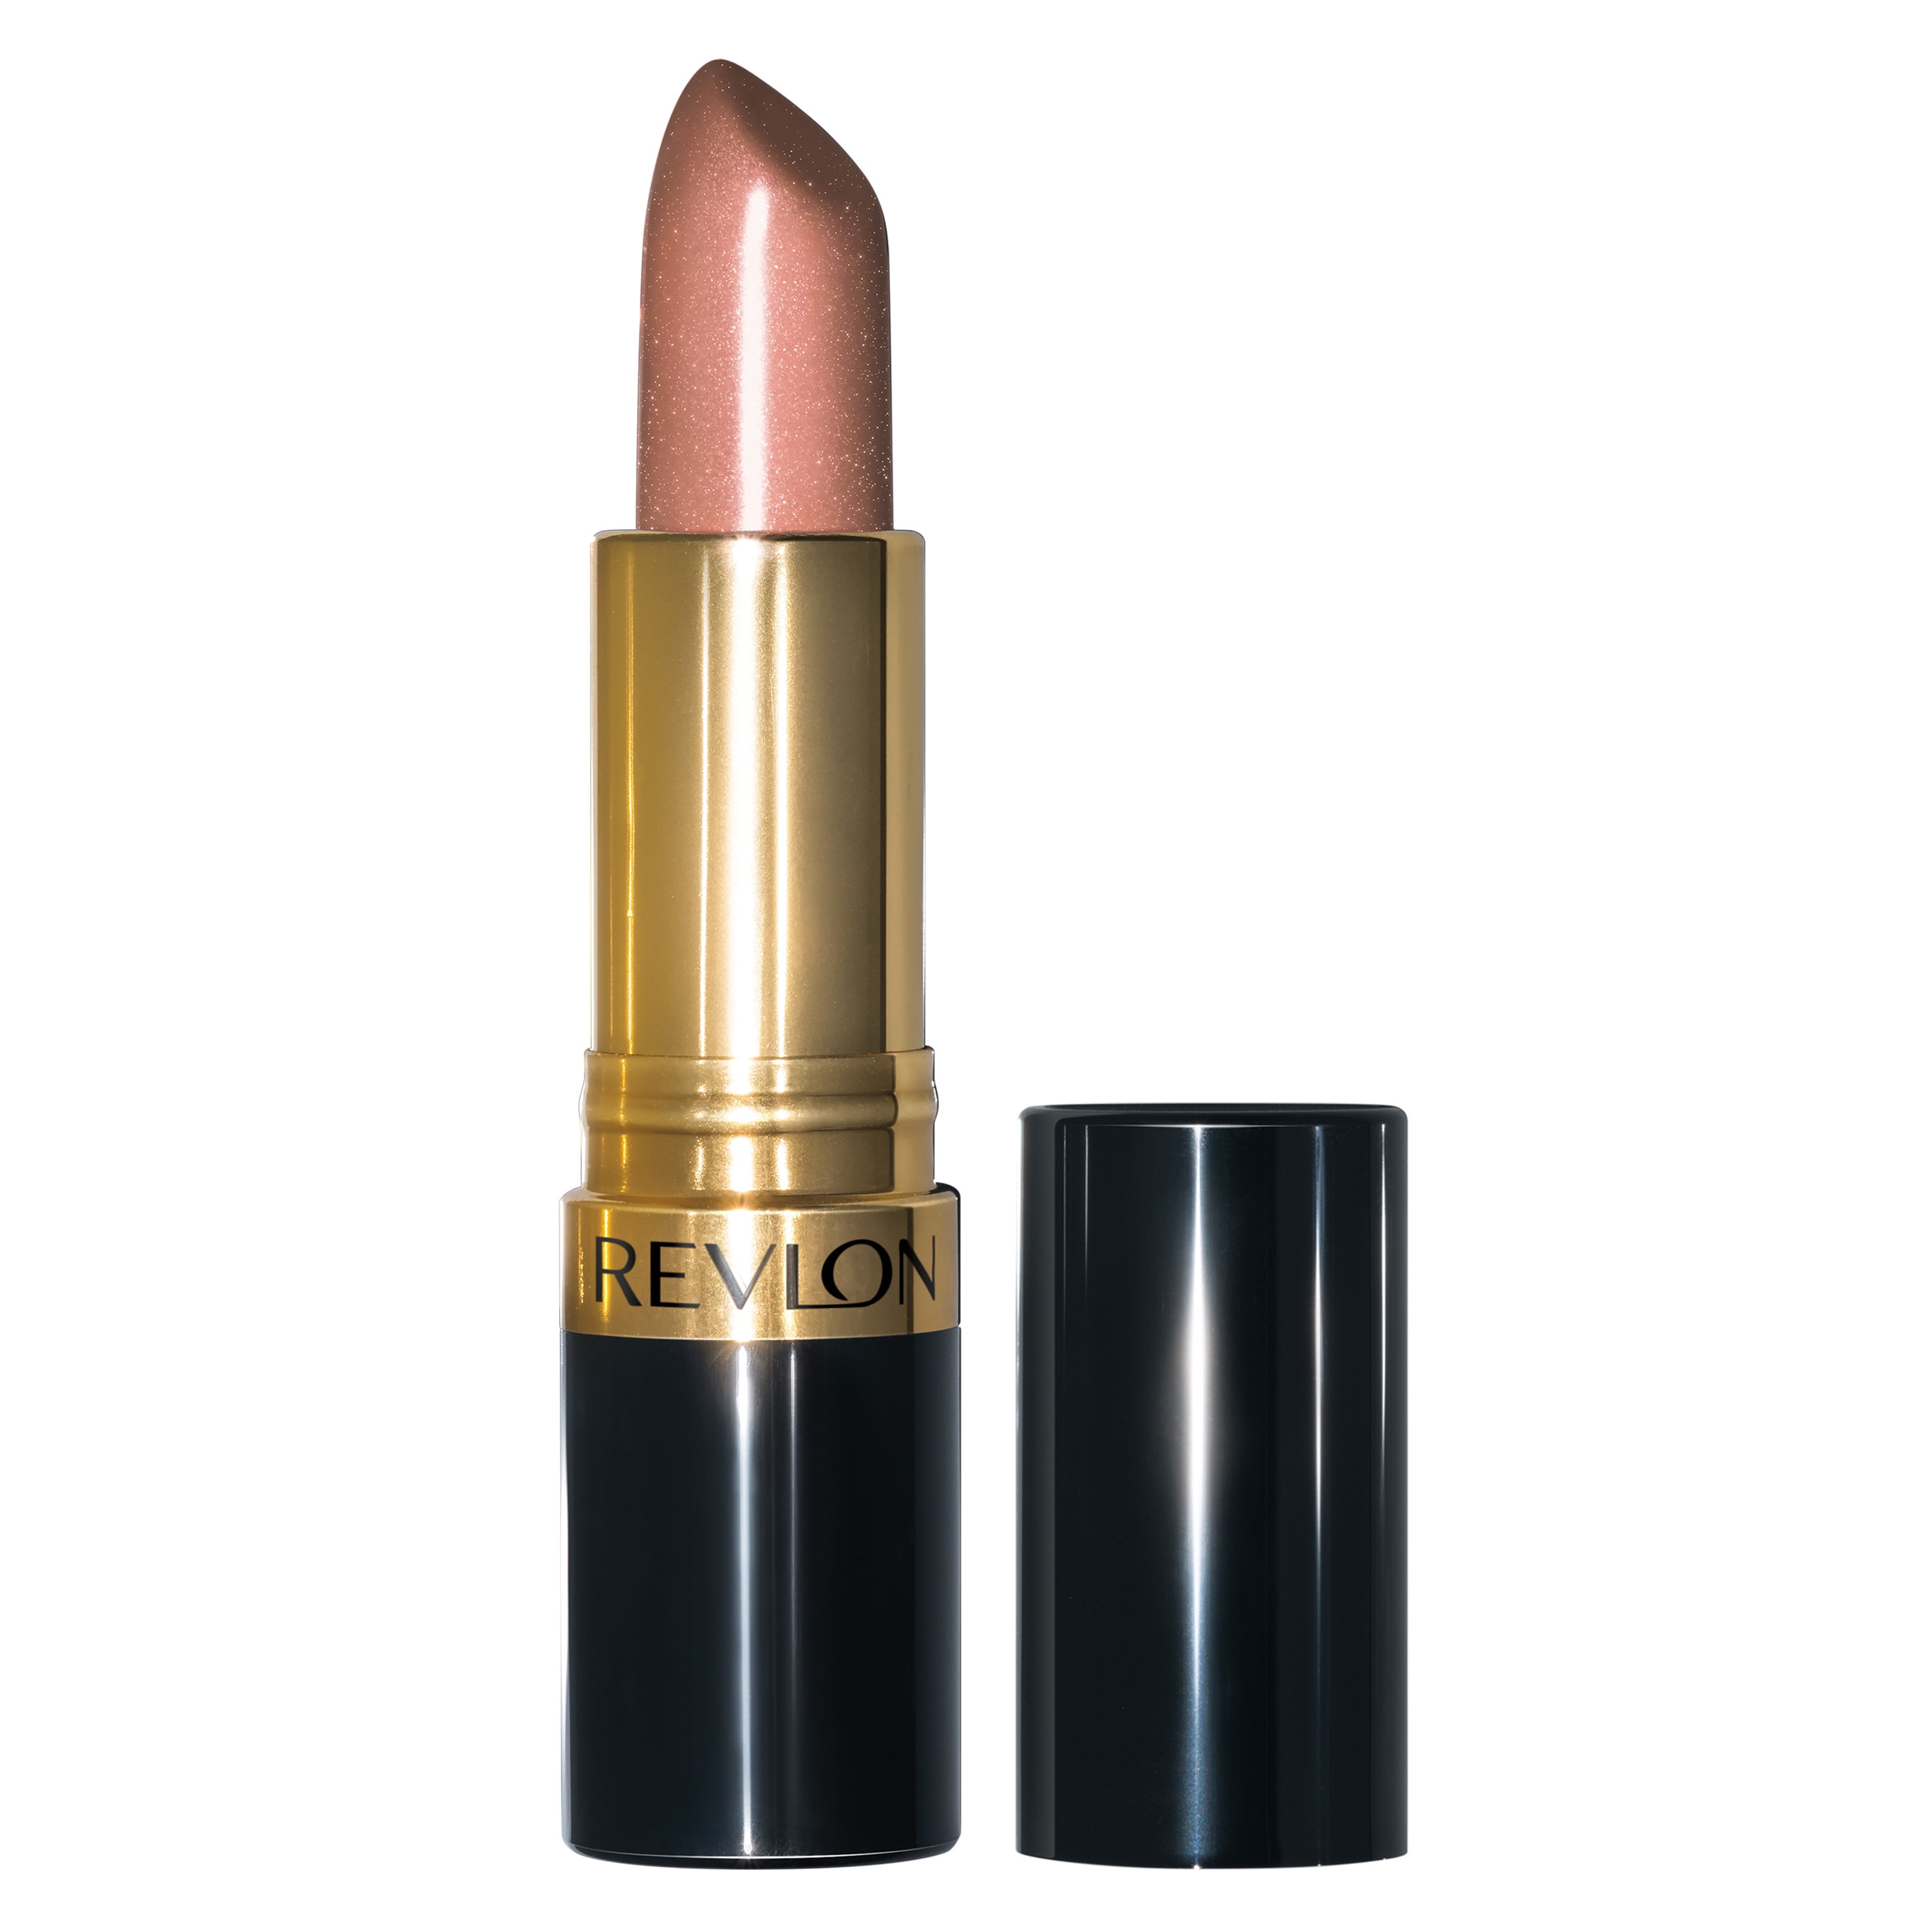 Revlon Super Lustrous Lipstick, Pearl Finish, High Impact Lipcolor with Moisturizing Creamy Formula, Infused with Vitamin E and Avocado Oil, 205 Champagne On Ice, 0.15 oz